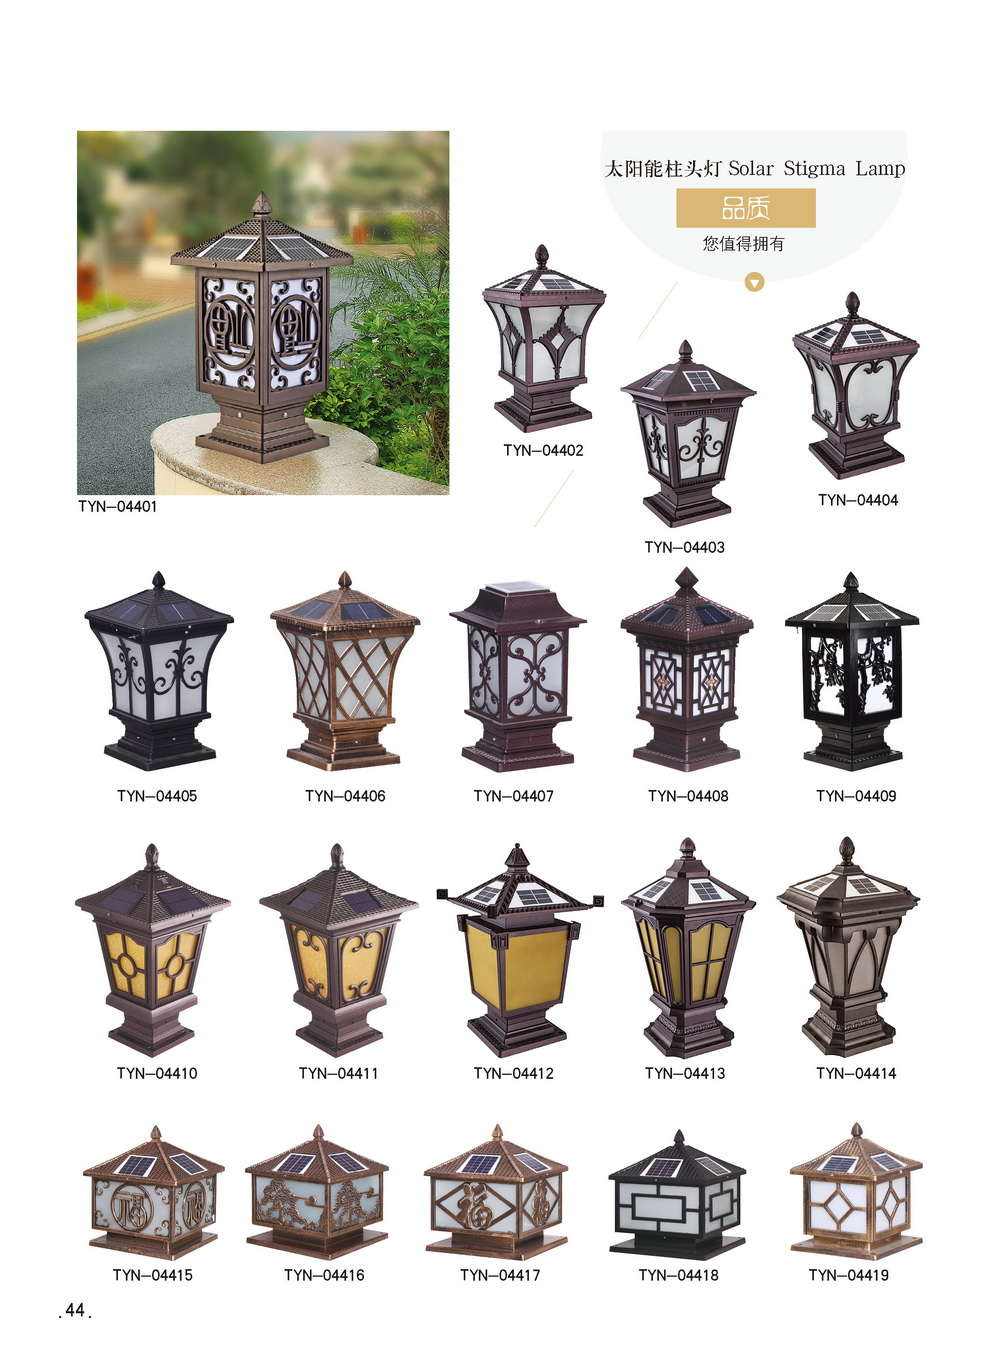 Solar LED courtyard lights have good transparency, durability, and innovative styles